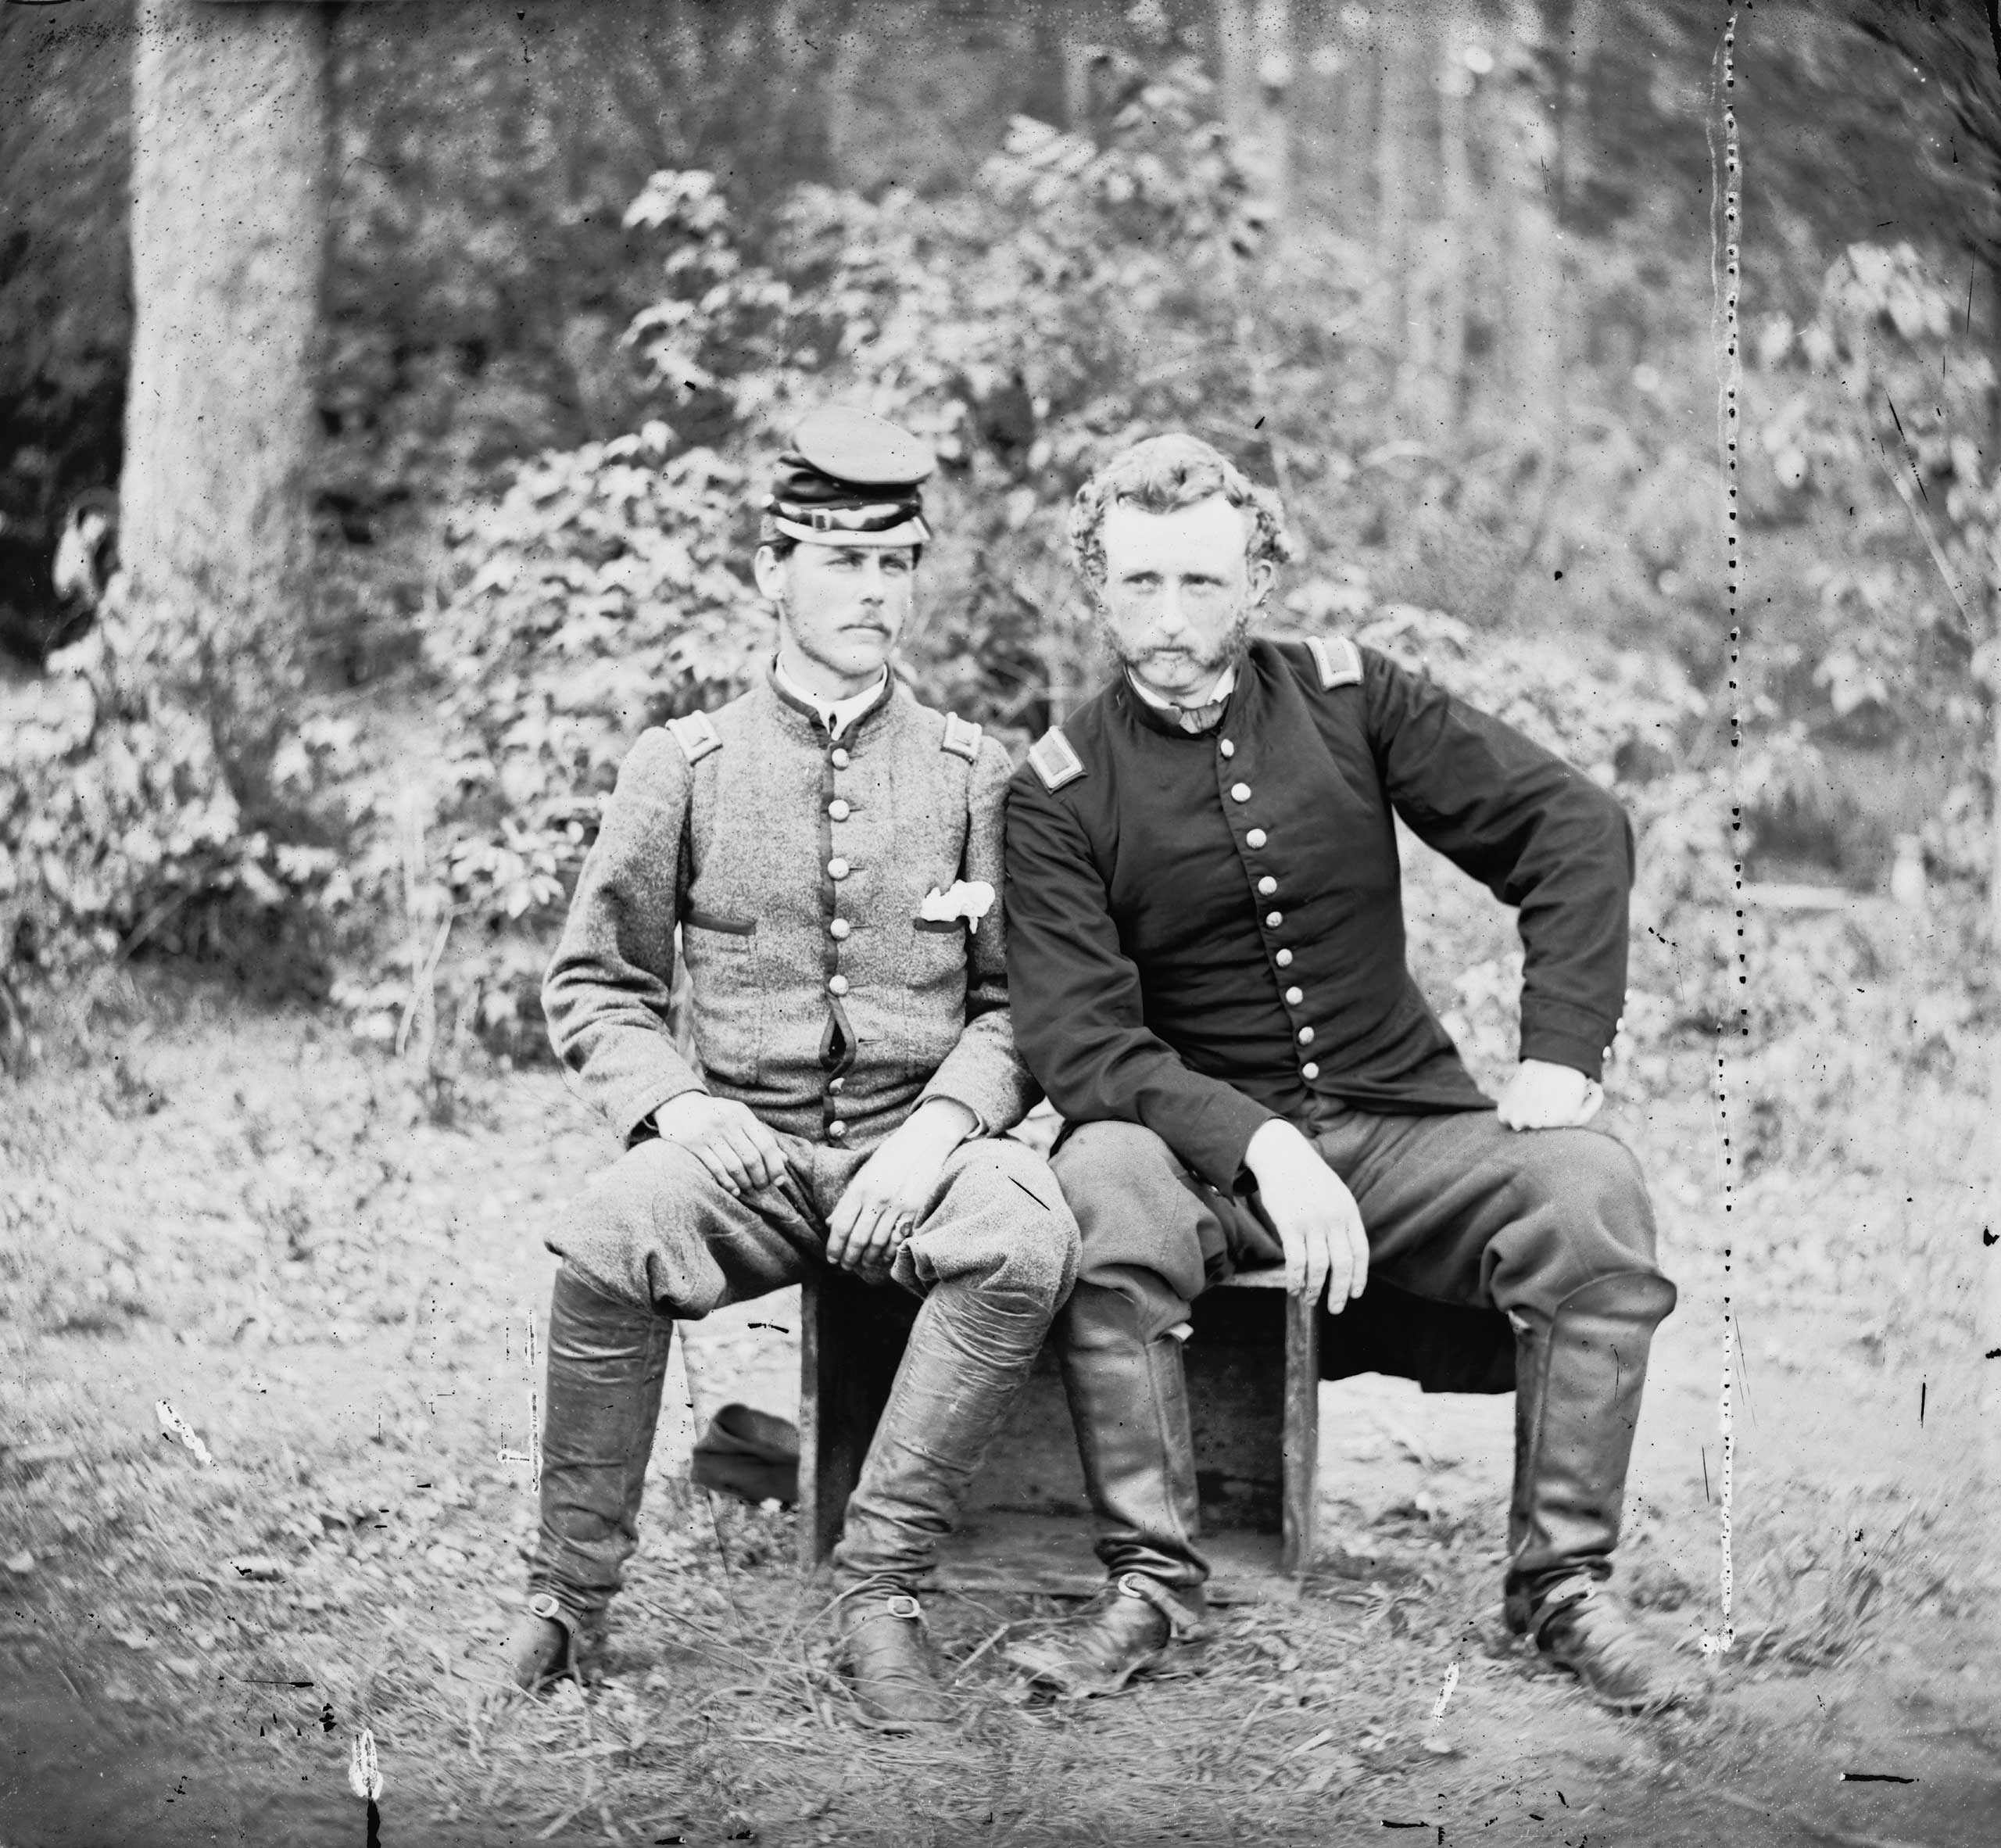 Capt. Custer of the 5th Cavalry is seen with Lt. Washington, a prisoner and former classmate.